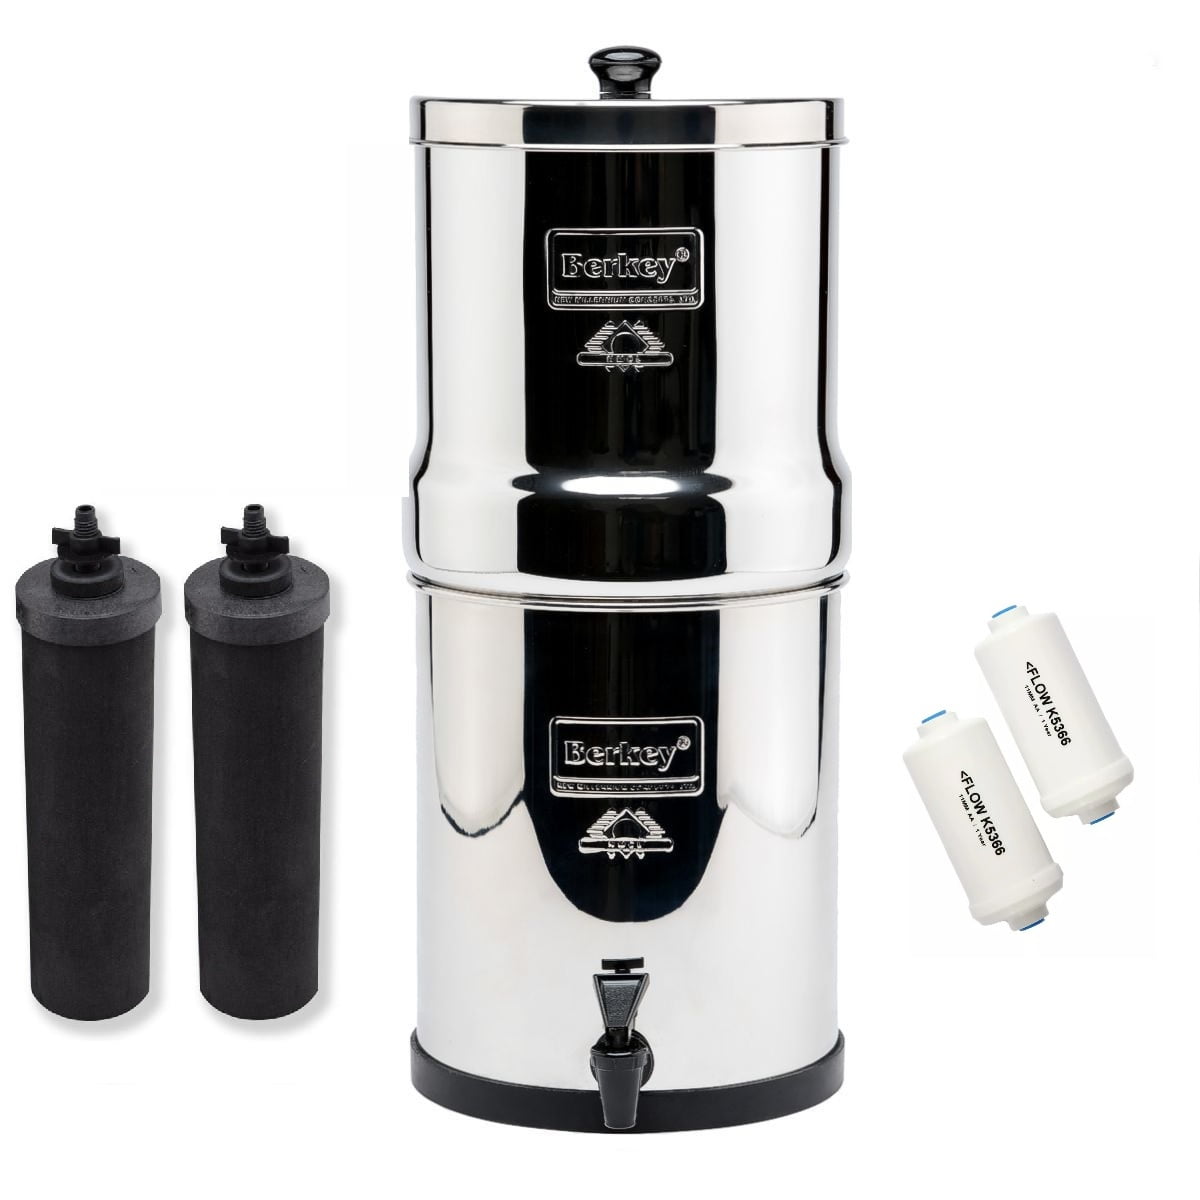 Big Berkey Gravity-Fed Stainless Steel Countertop Water Filter System 2.25  Gallon with 2 Authentic Black Berkey Elements BB9-2 Filters - Kitchen  Countertop Water Filters 